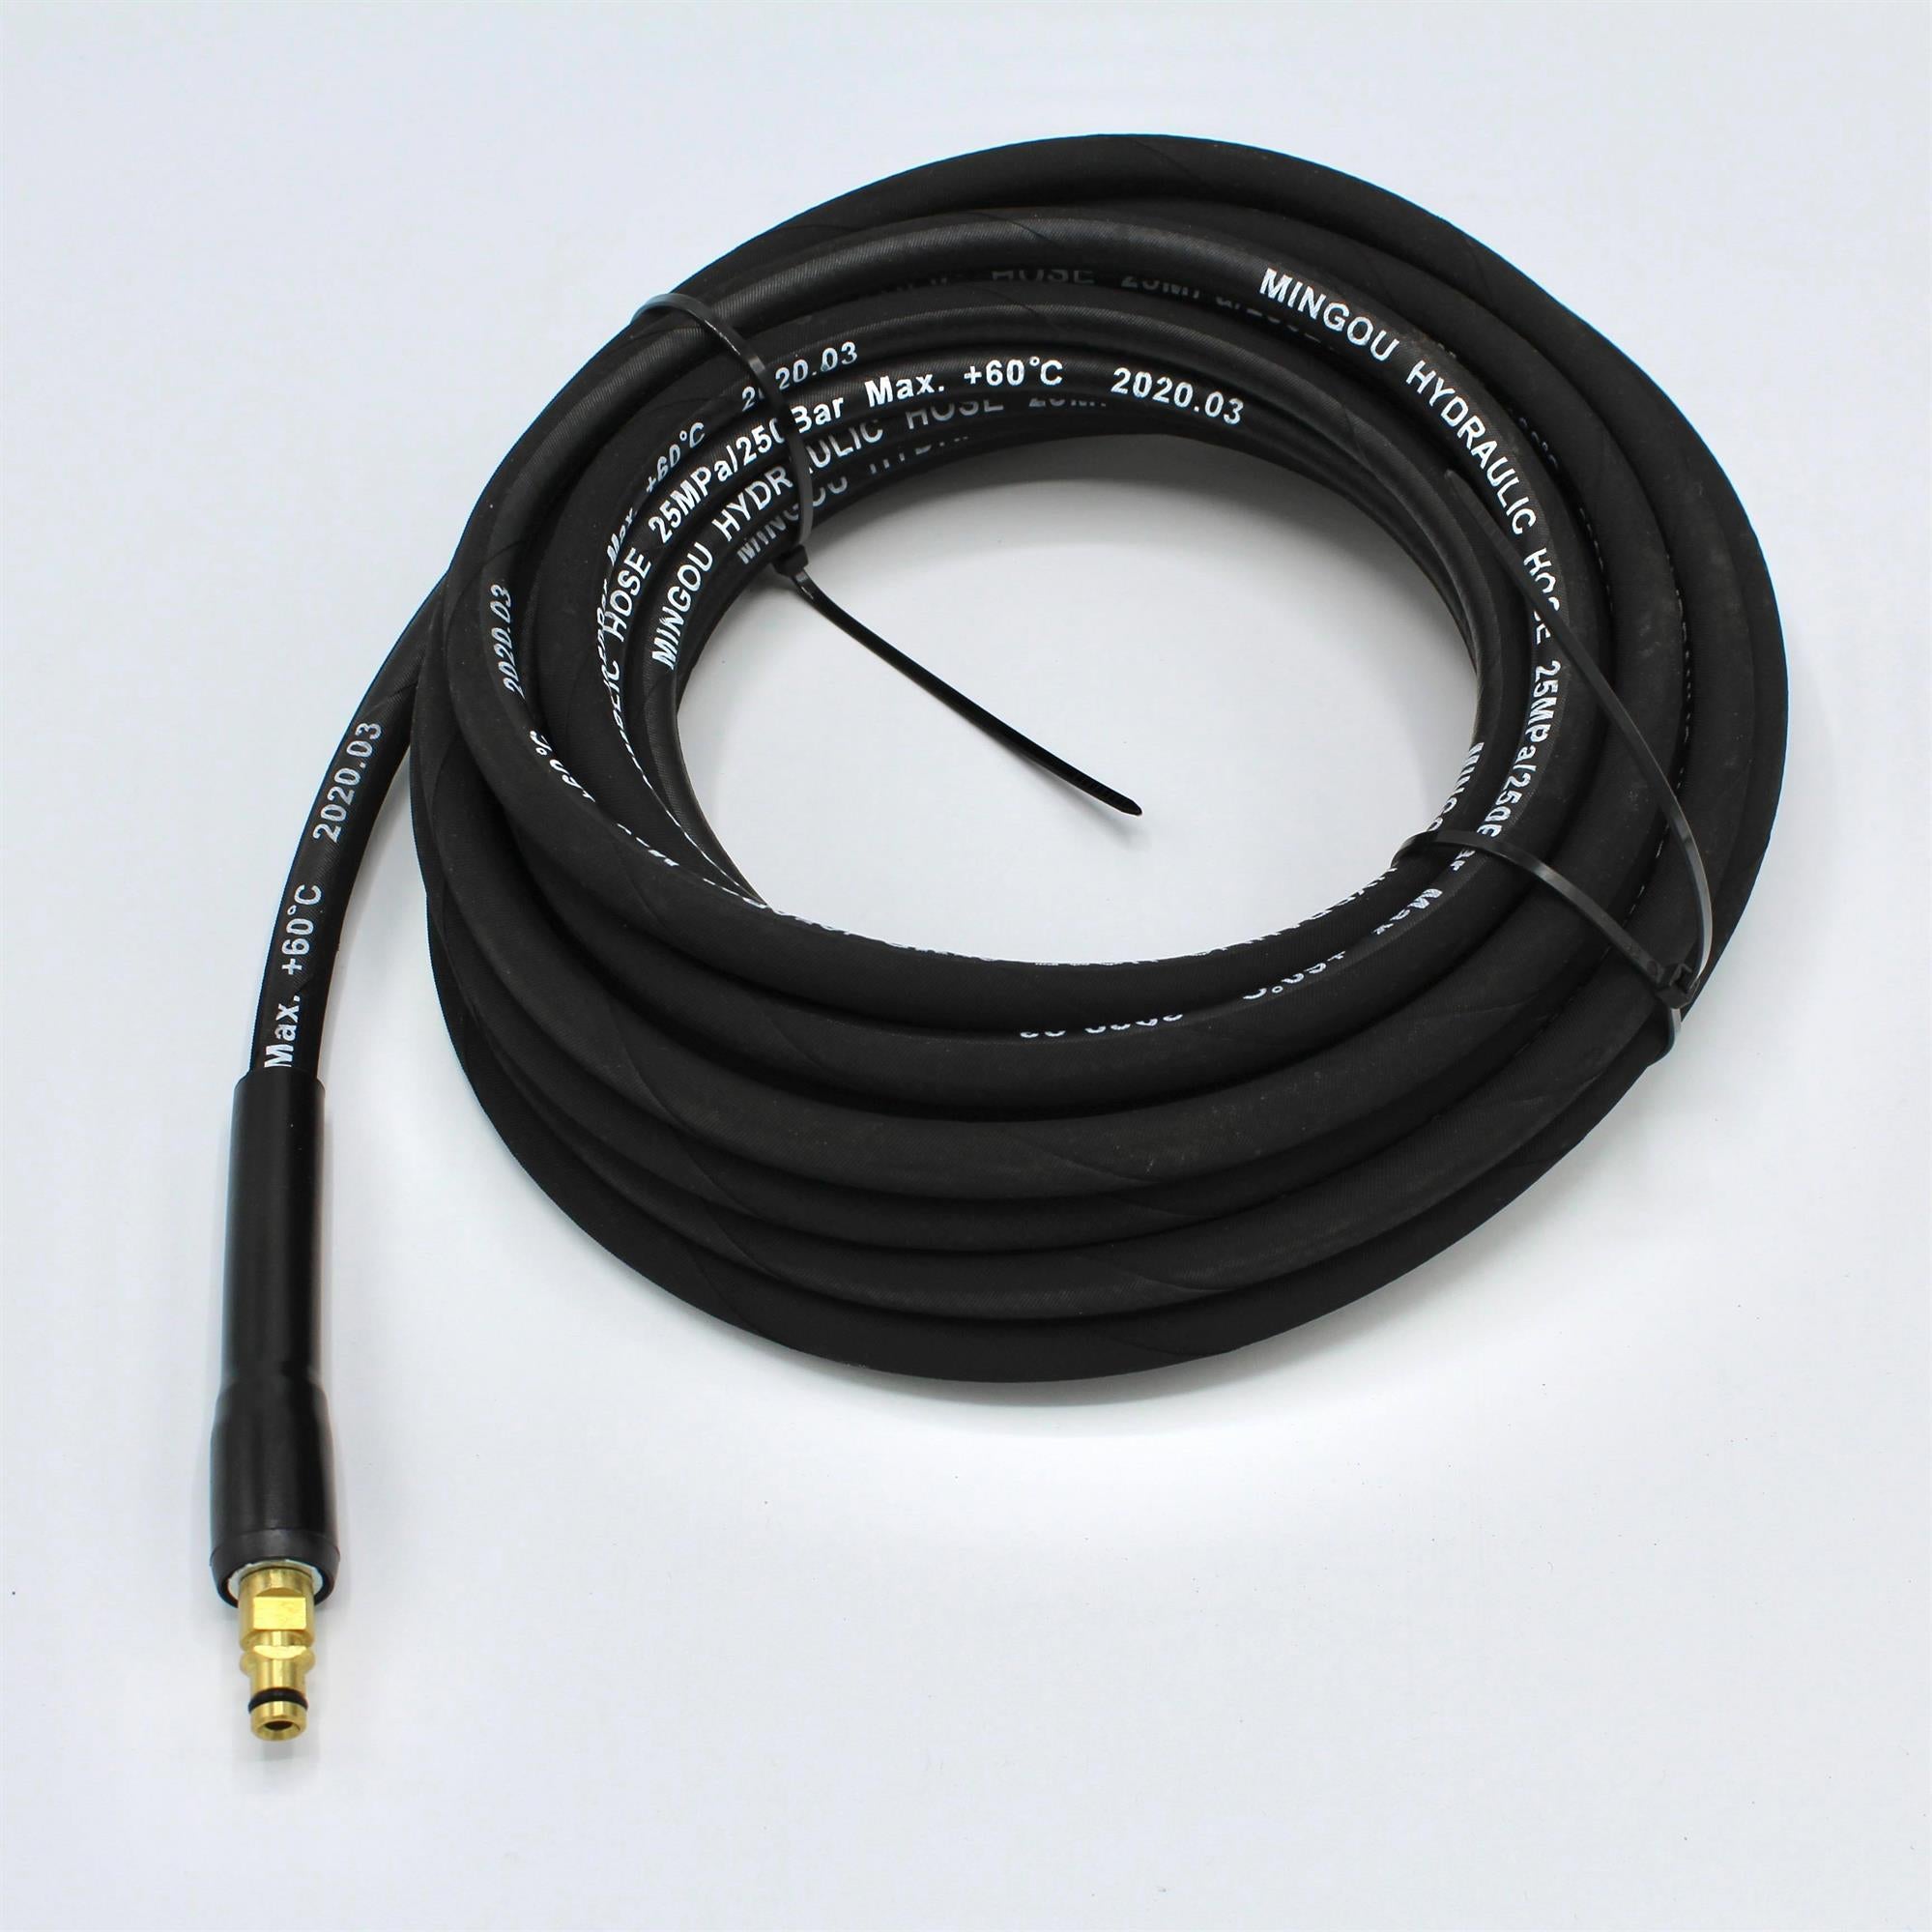 https://www.in2detailing.co.uk/cdn/shop/products/Karcher_K_Series_C_Clip_to_C_Clip_Reinforced_Heavy_Duty_Rubber_Replacement_Hose_2048x2048.jpg?v=1592798249